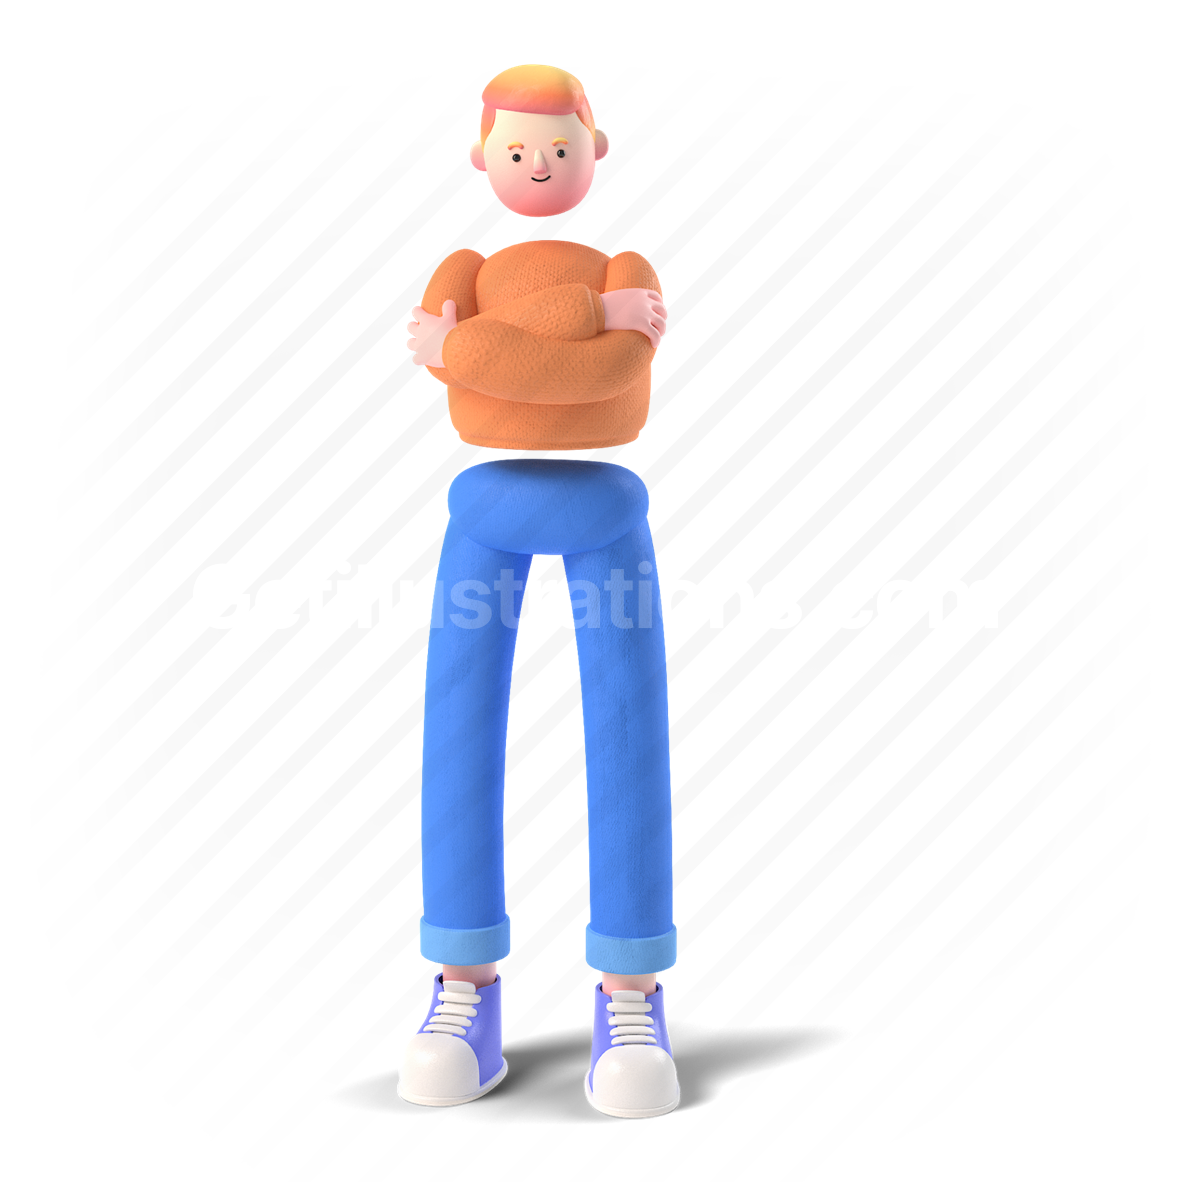 3d, people, person, boy, man, crossed arms, arm, stance, position